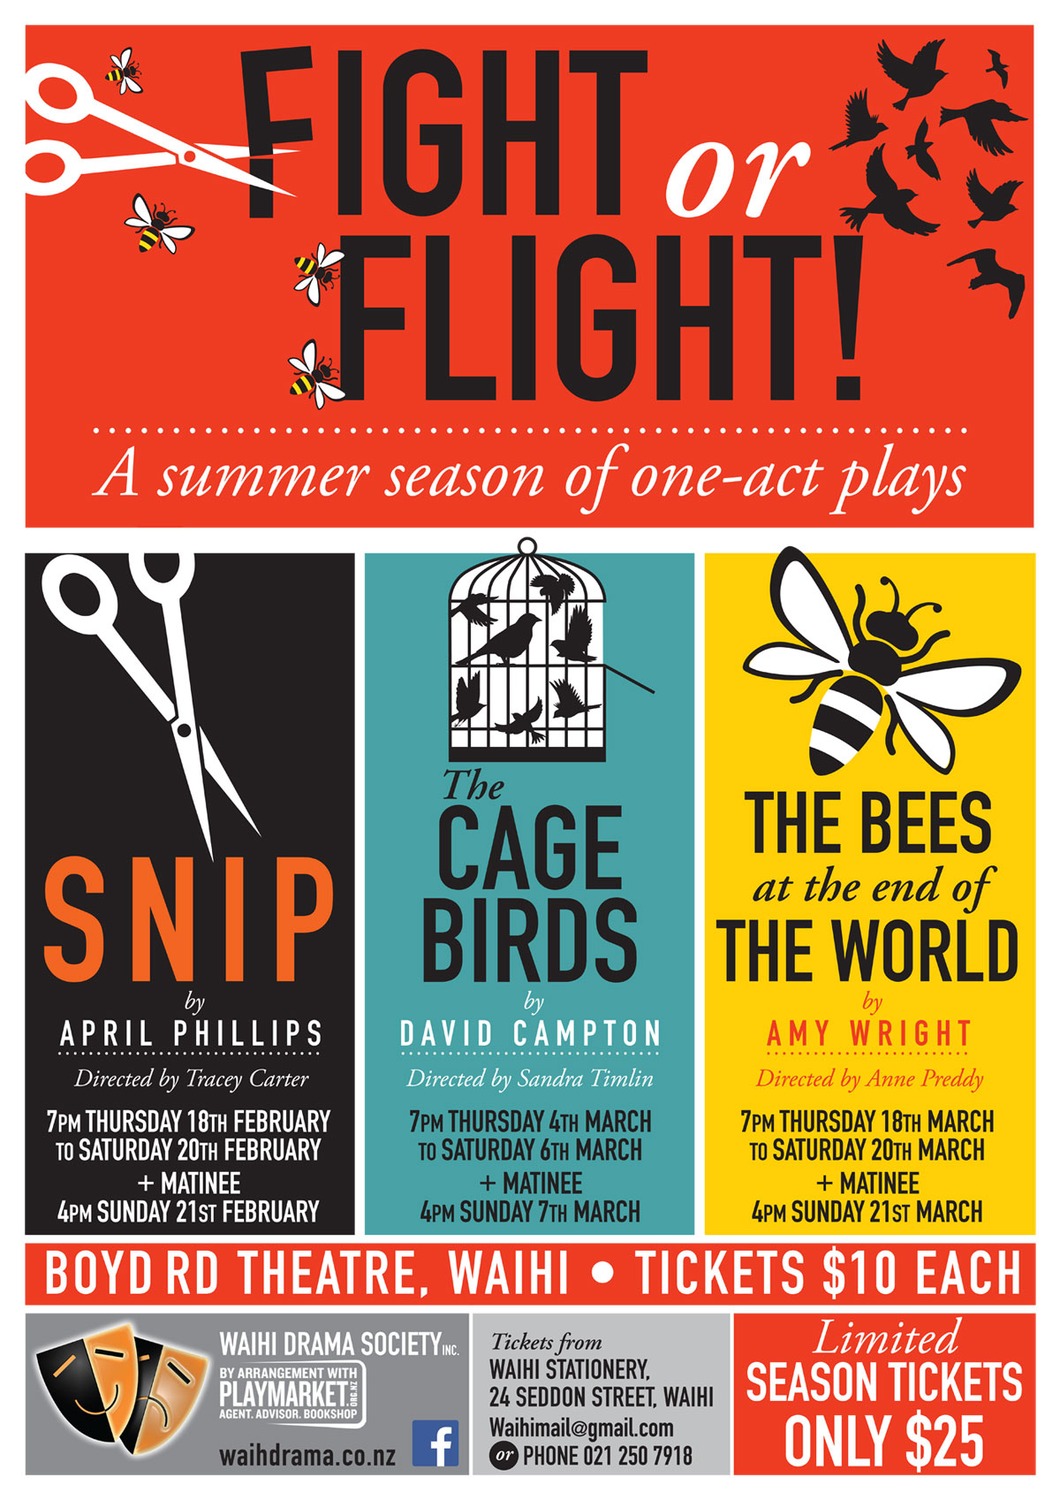 Fight or Flight — A summer season of one-act plays